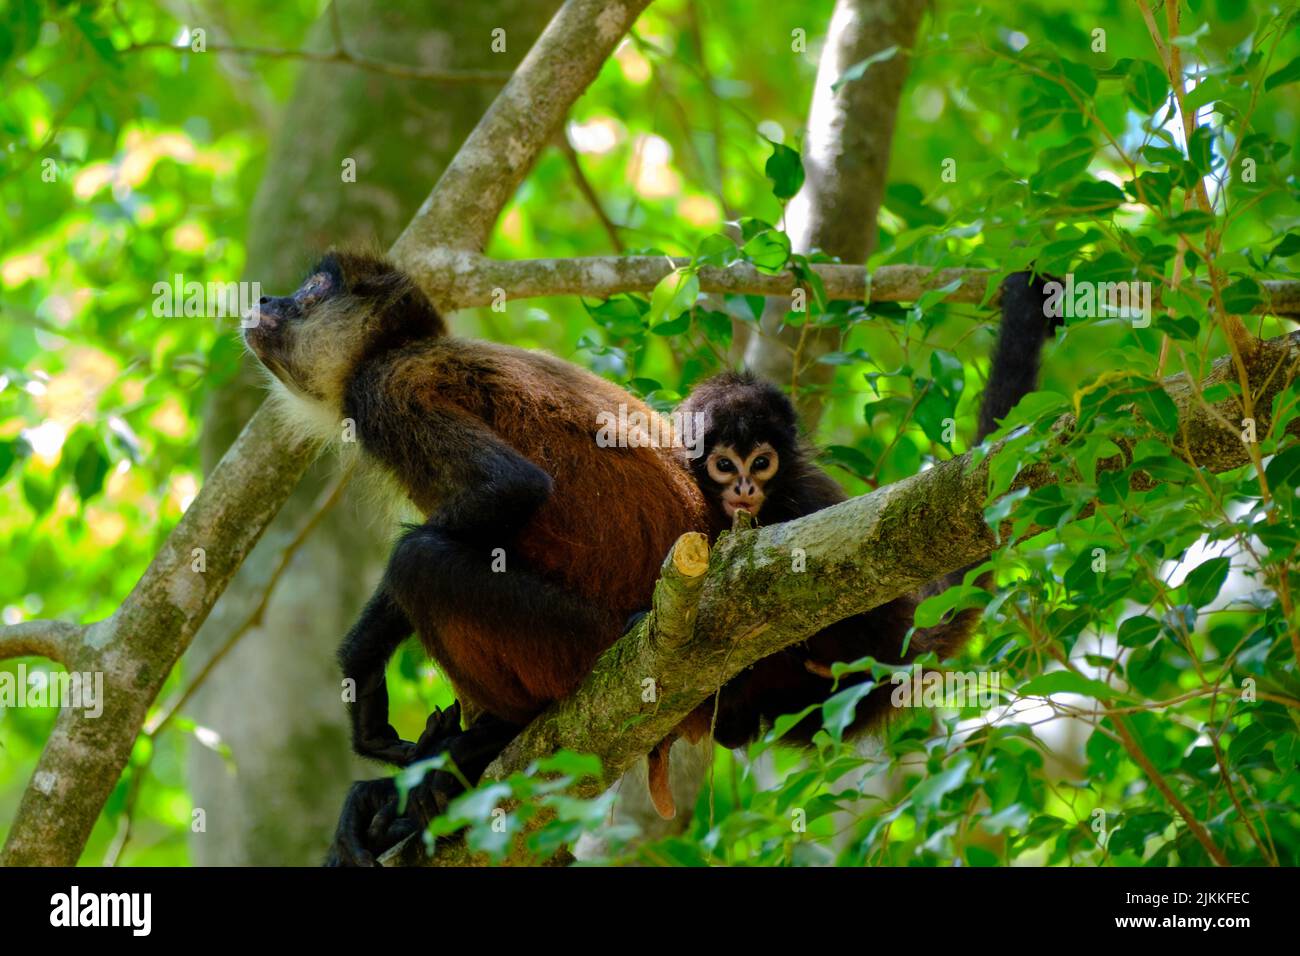 A closeup of two spider monkeys sitting on a tree branches Stock Photo